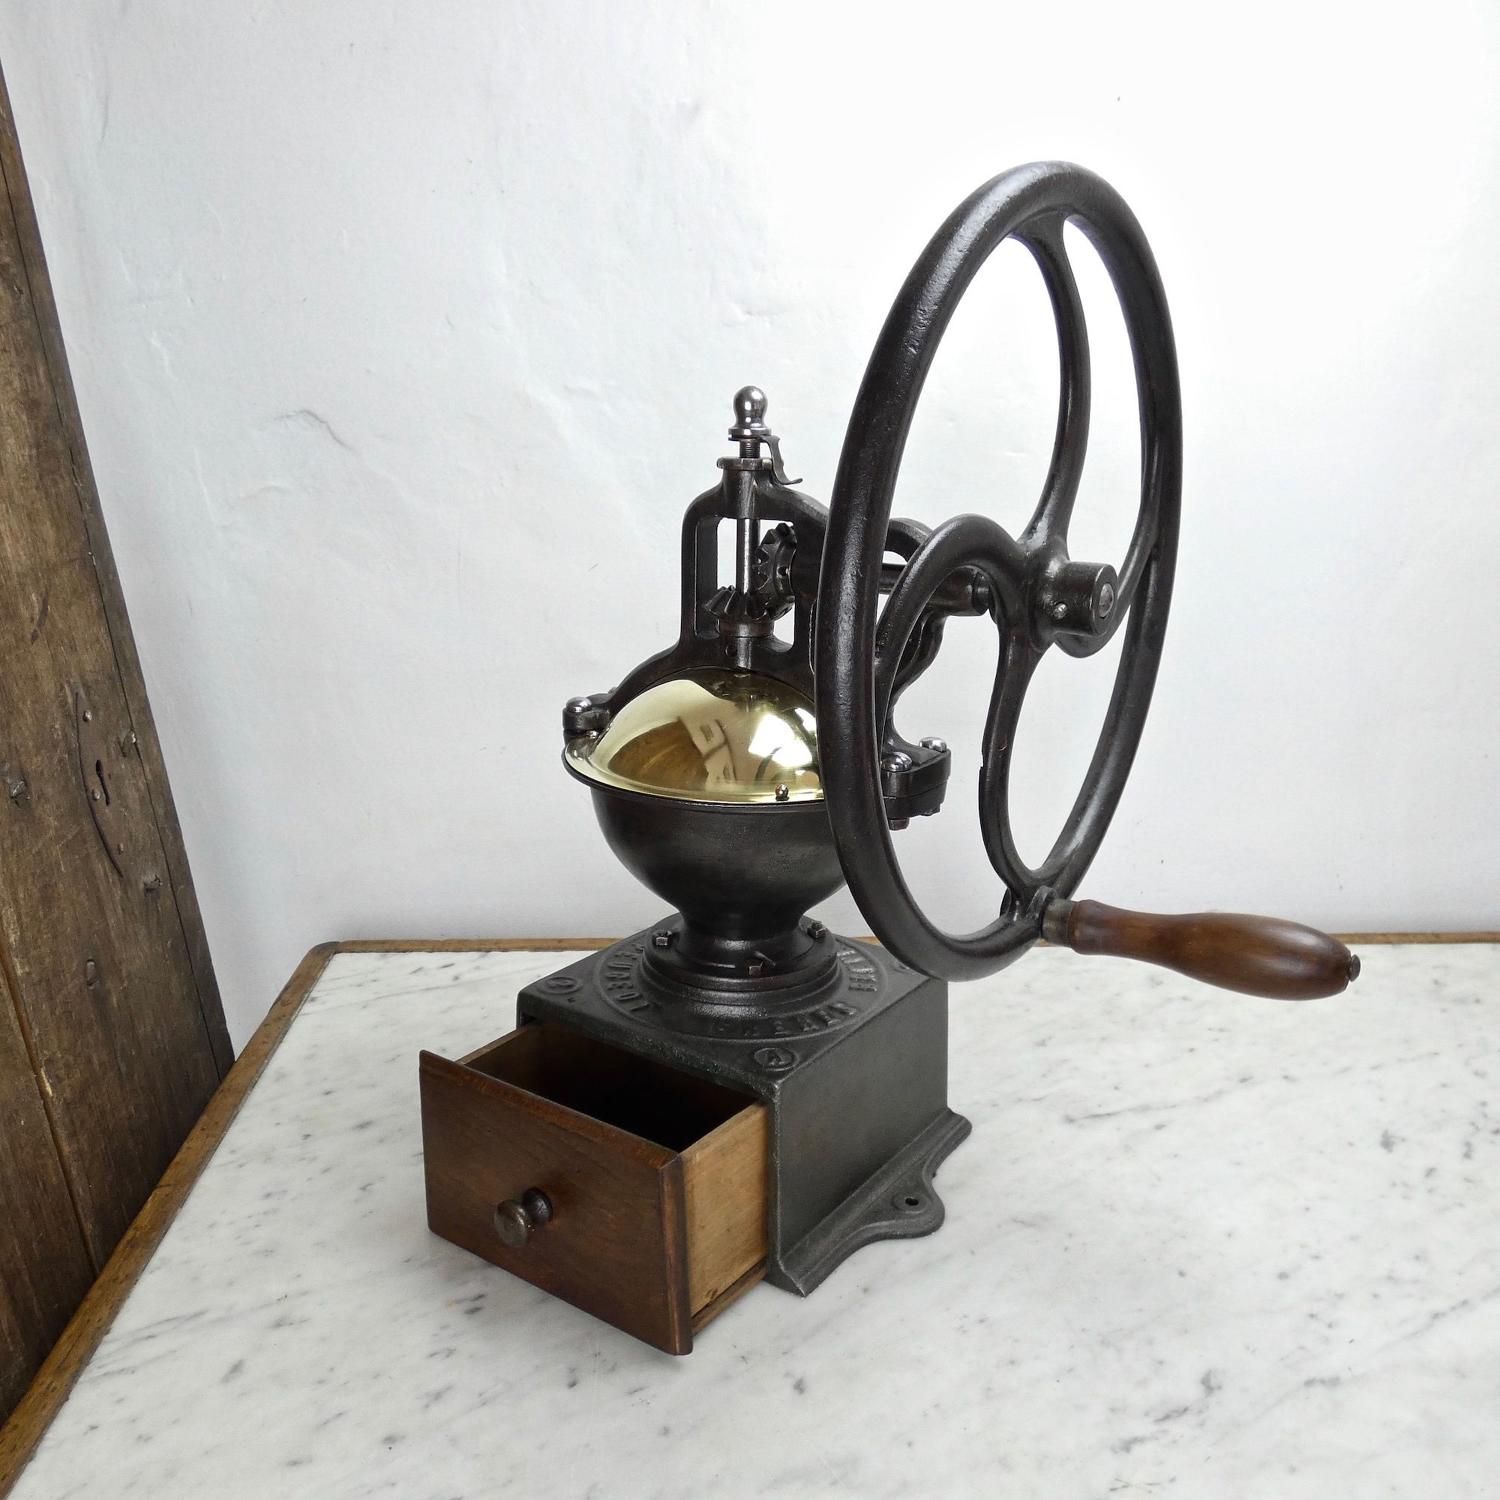 Peugeot coffee mill with wheel.